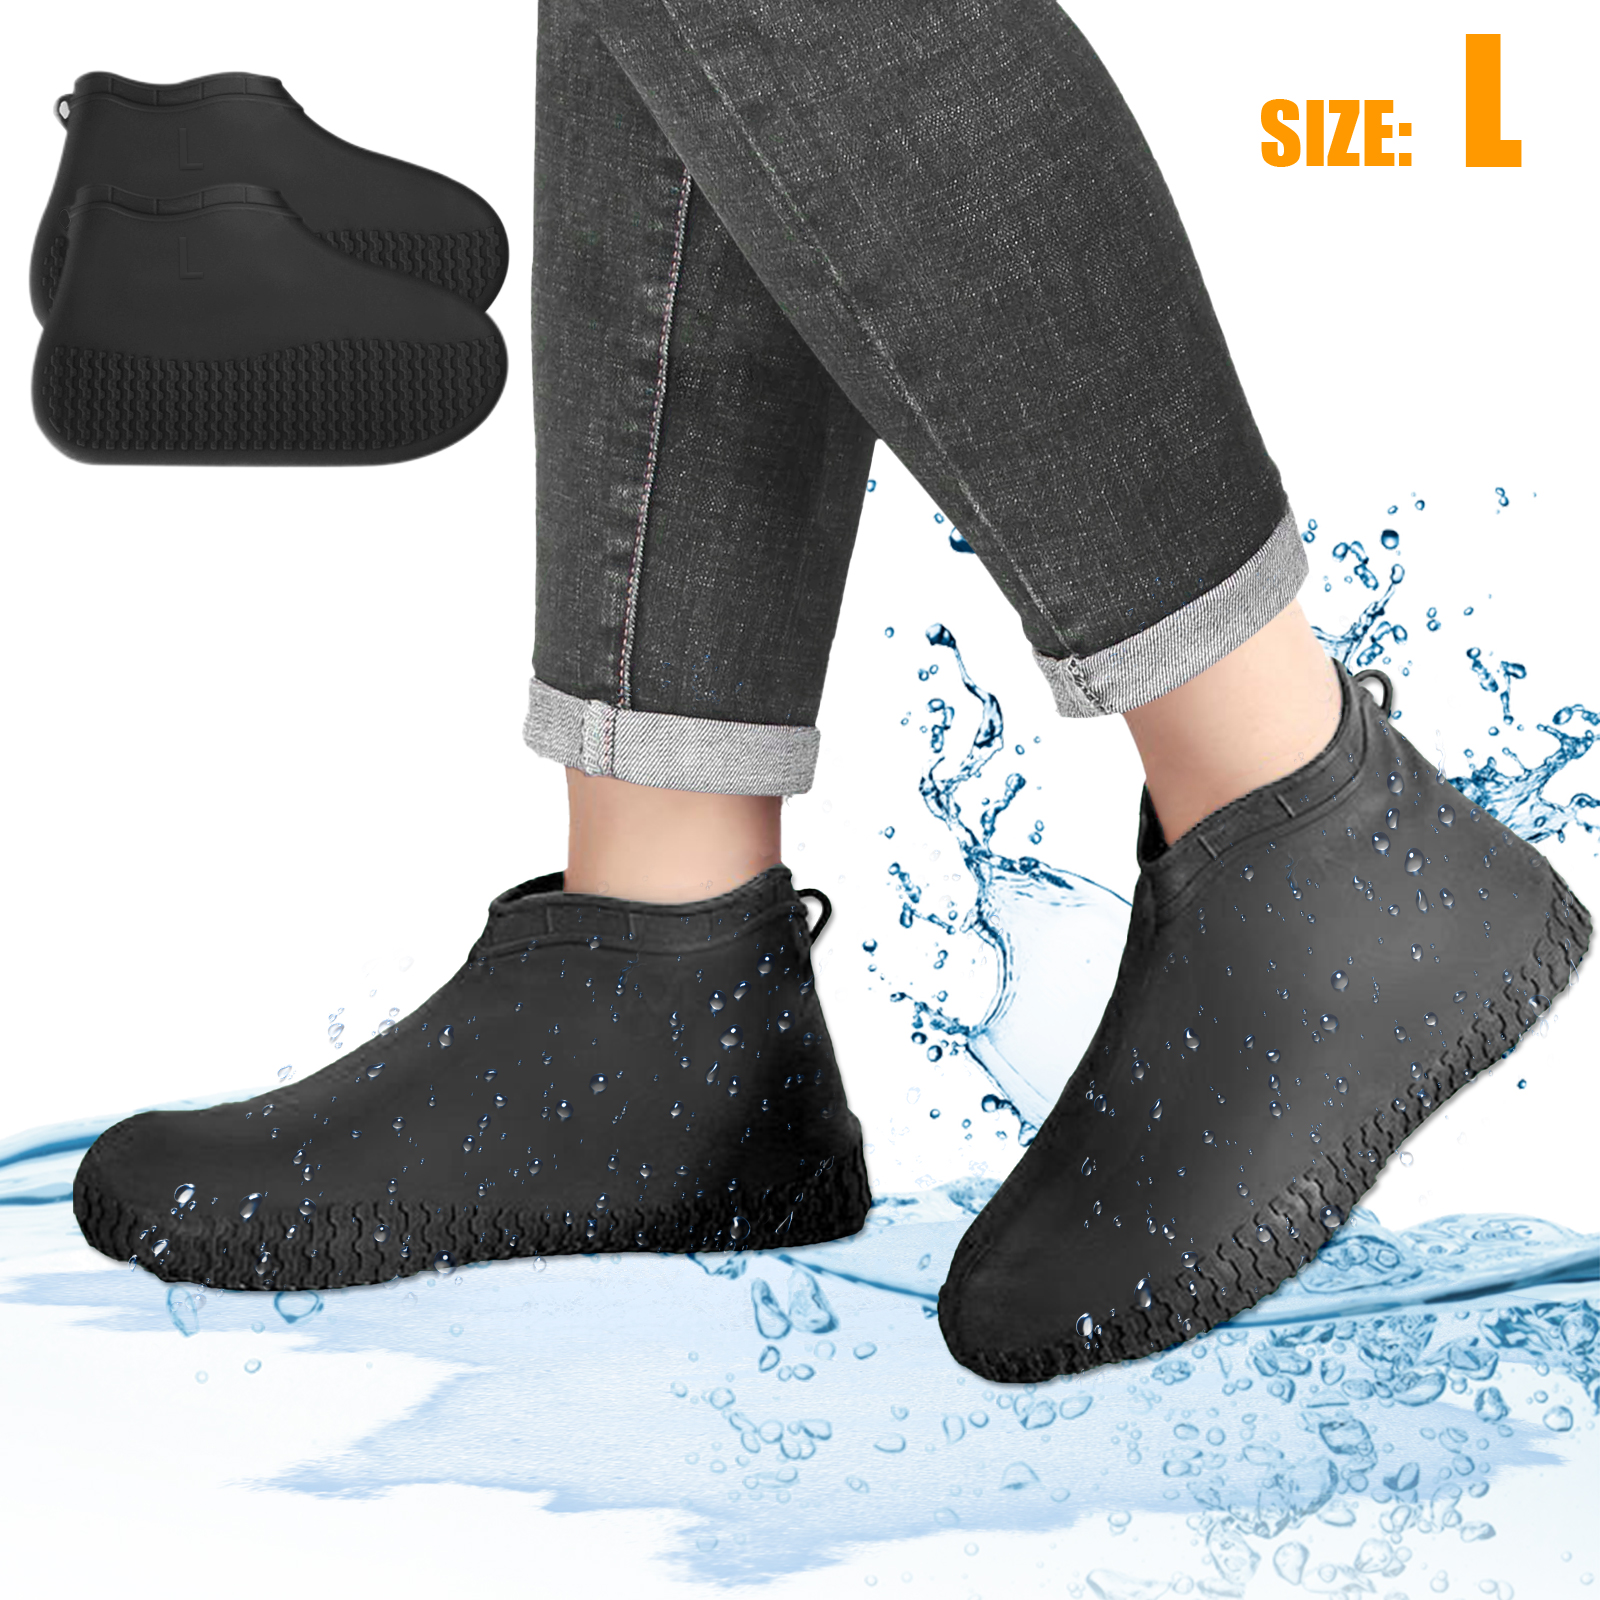 Silicone Overshoes Rain Waterproof Shoe Covers Boot Cover Preserve Recyclable